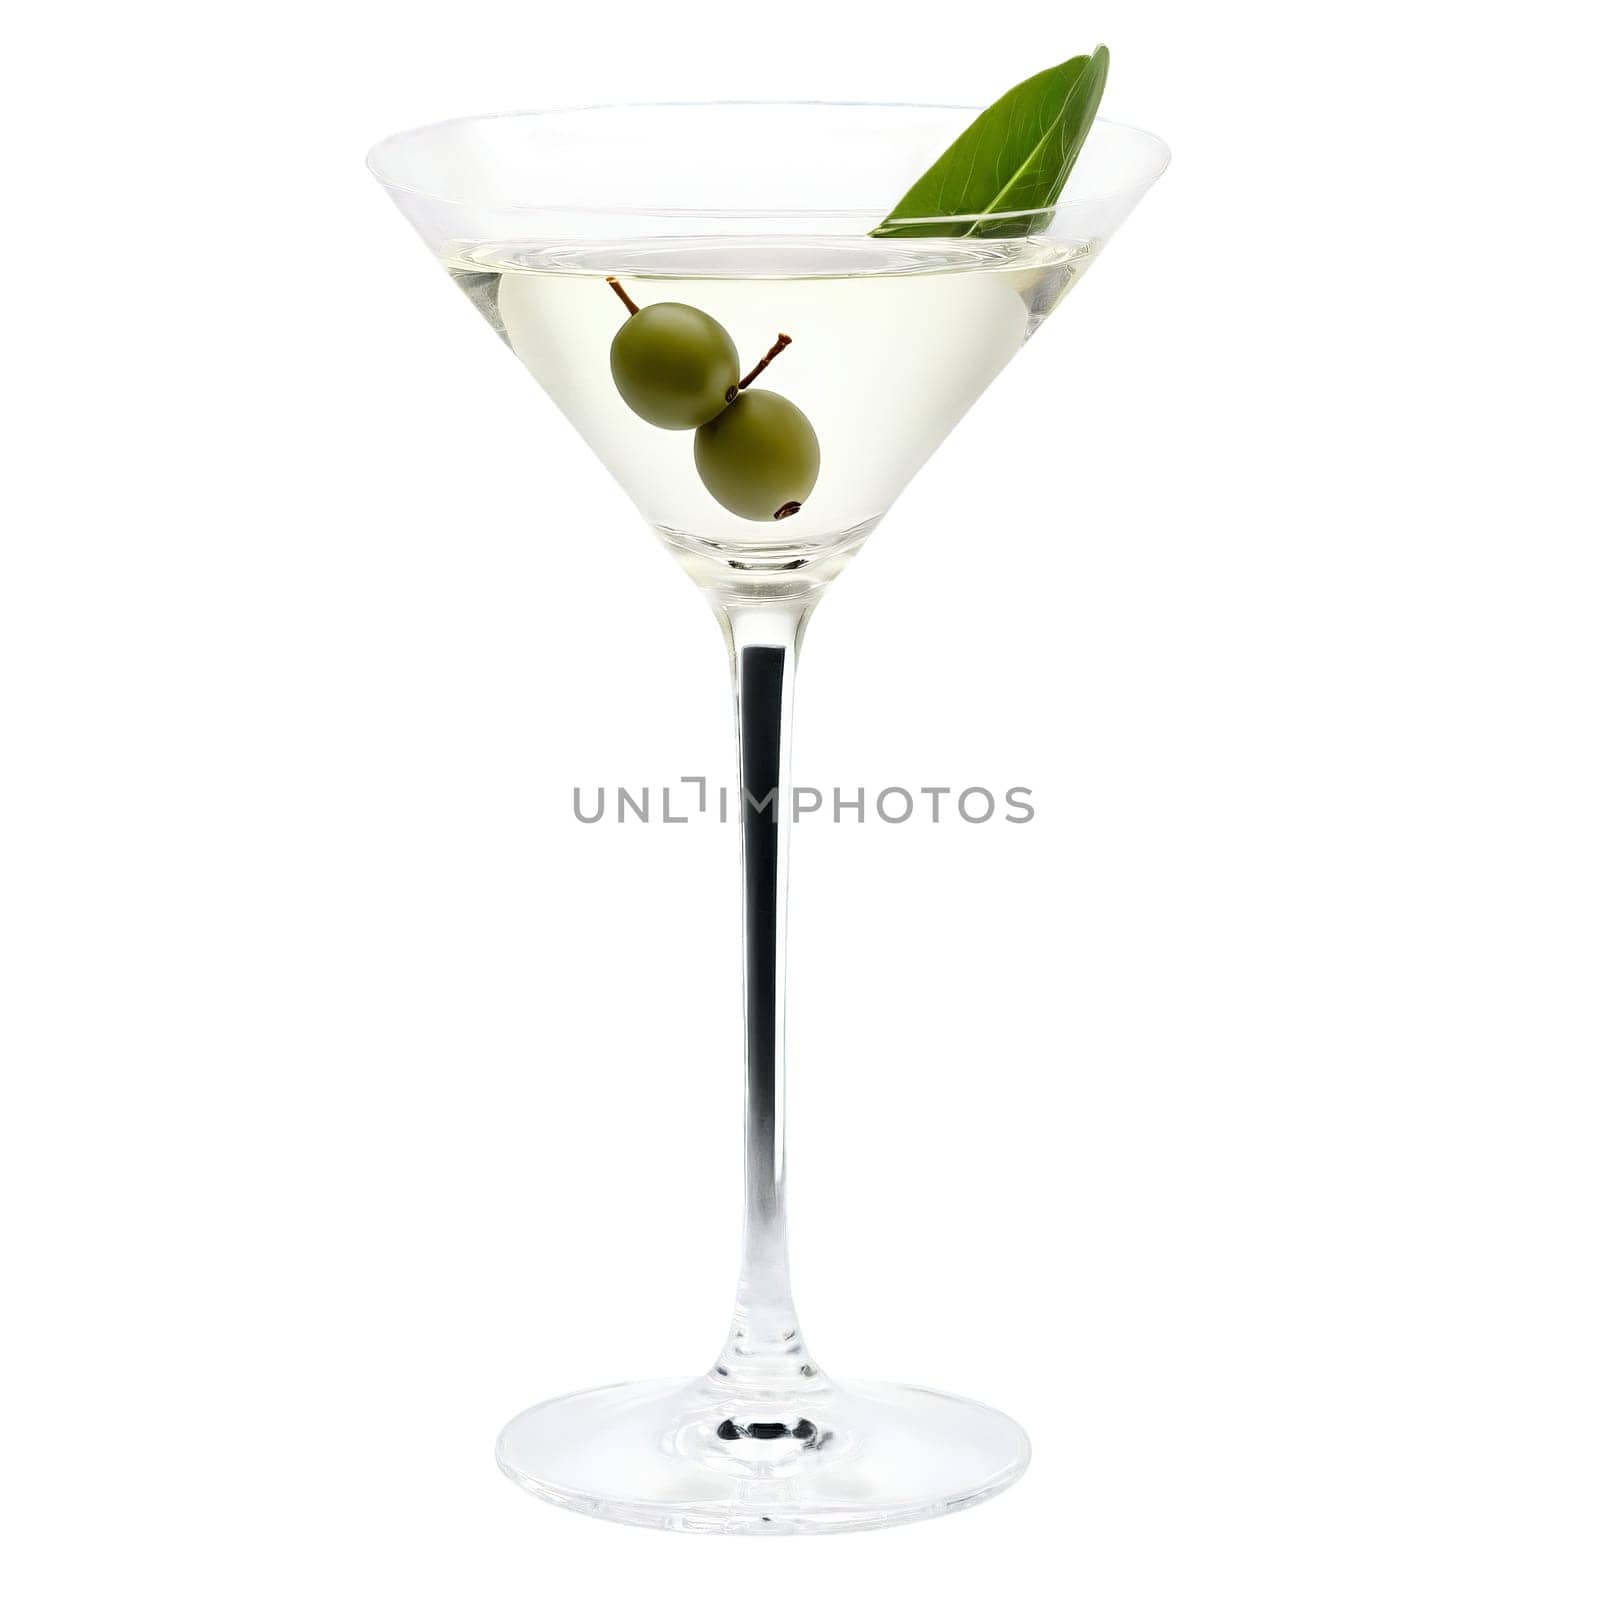 Elegant martini glass with a slender stem showcasing a classic gin martini garnished with an by panophotograph